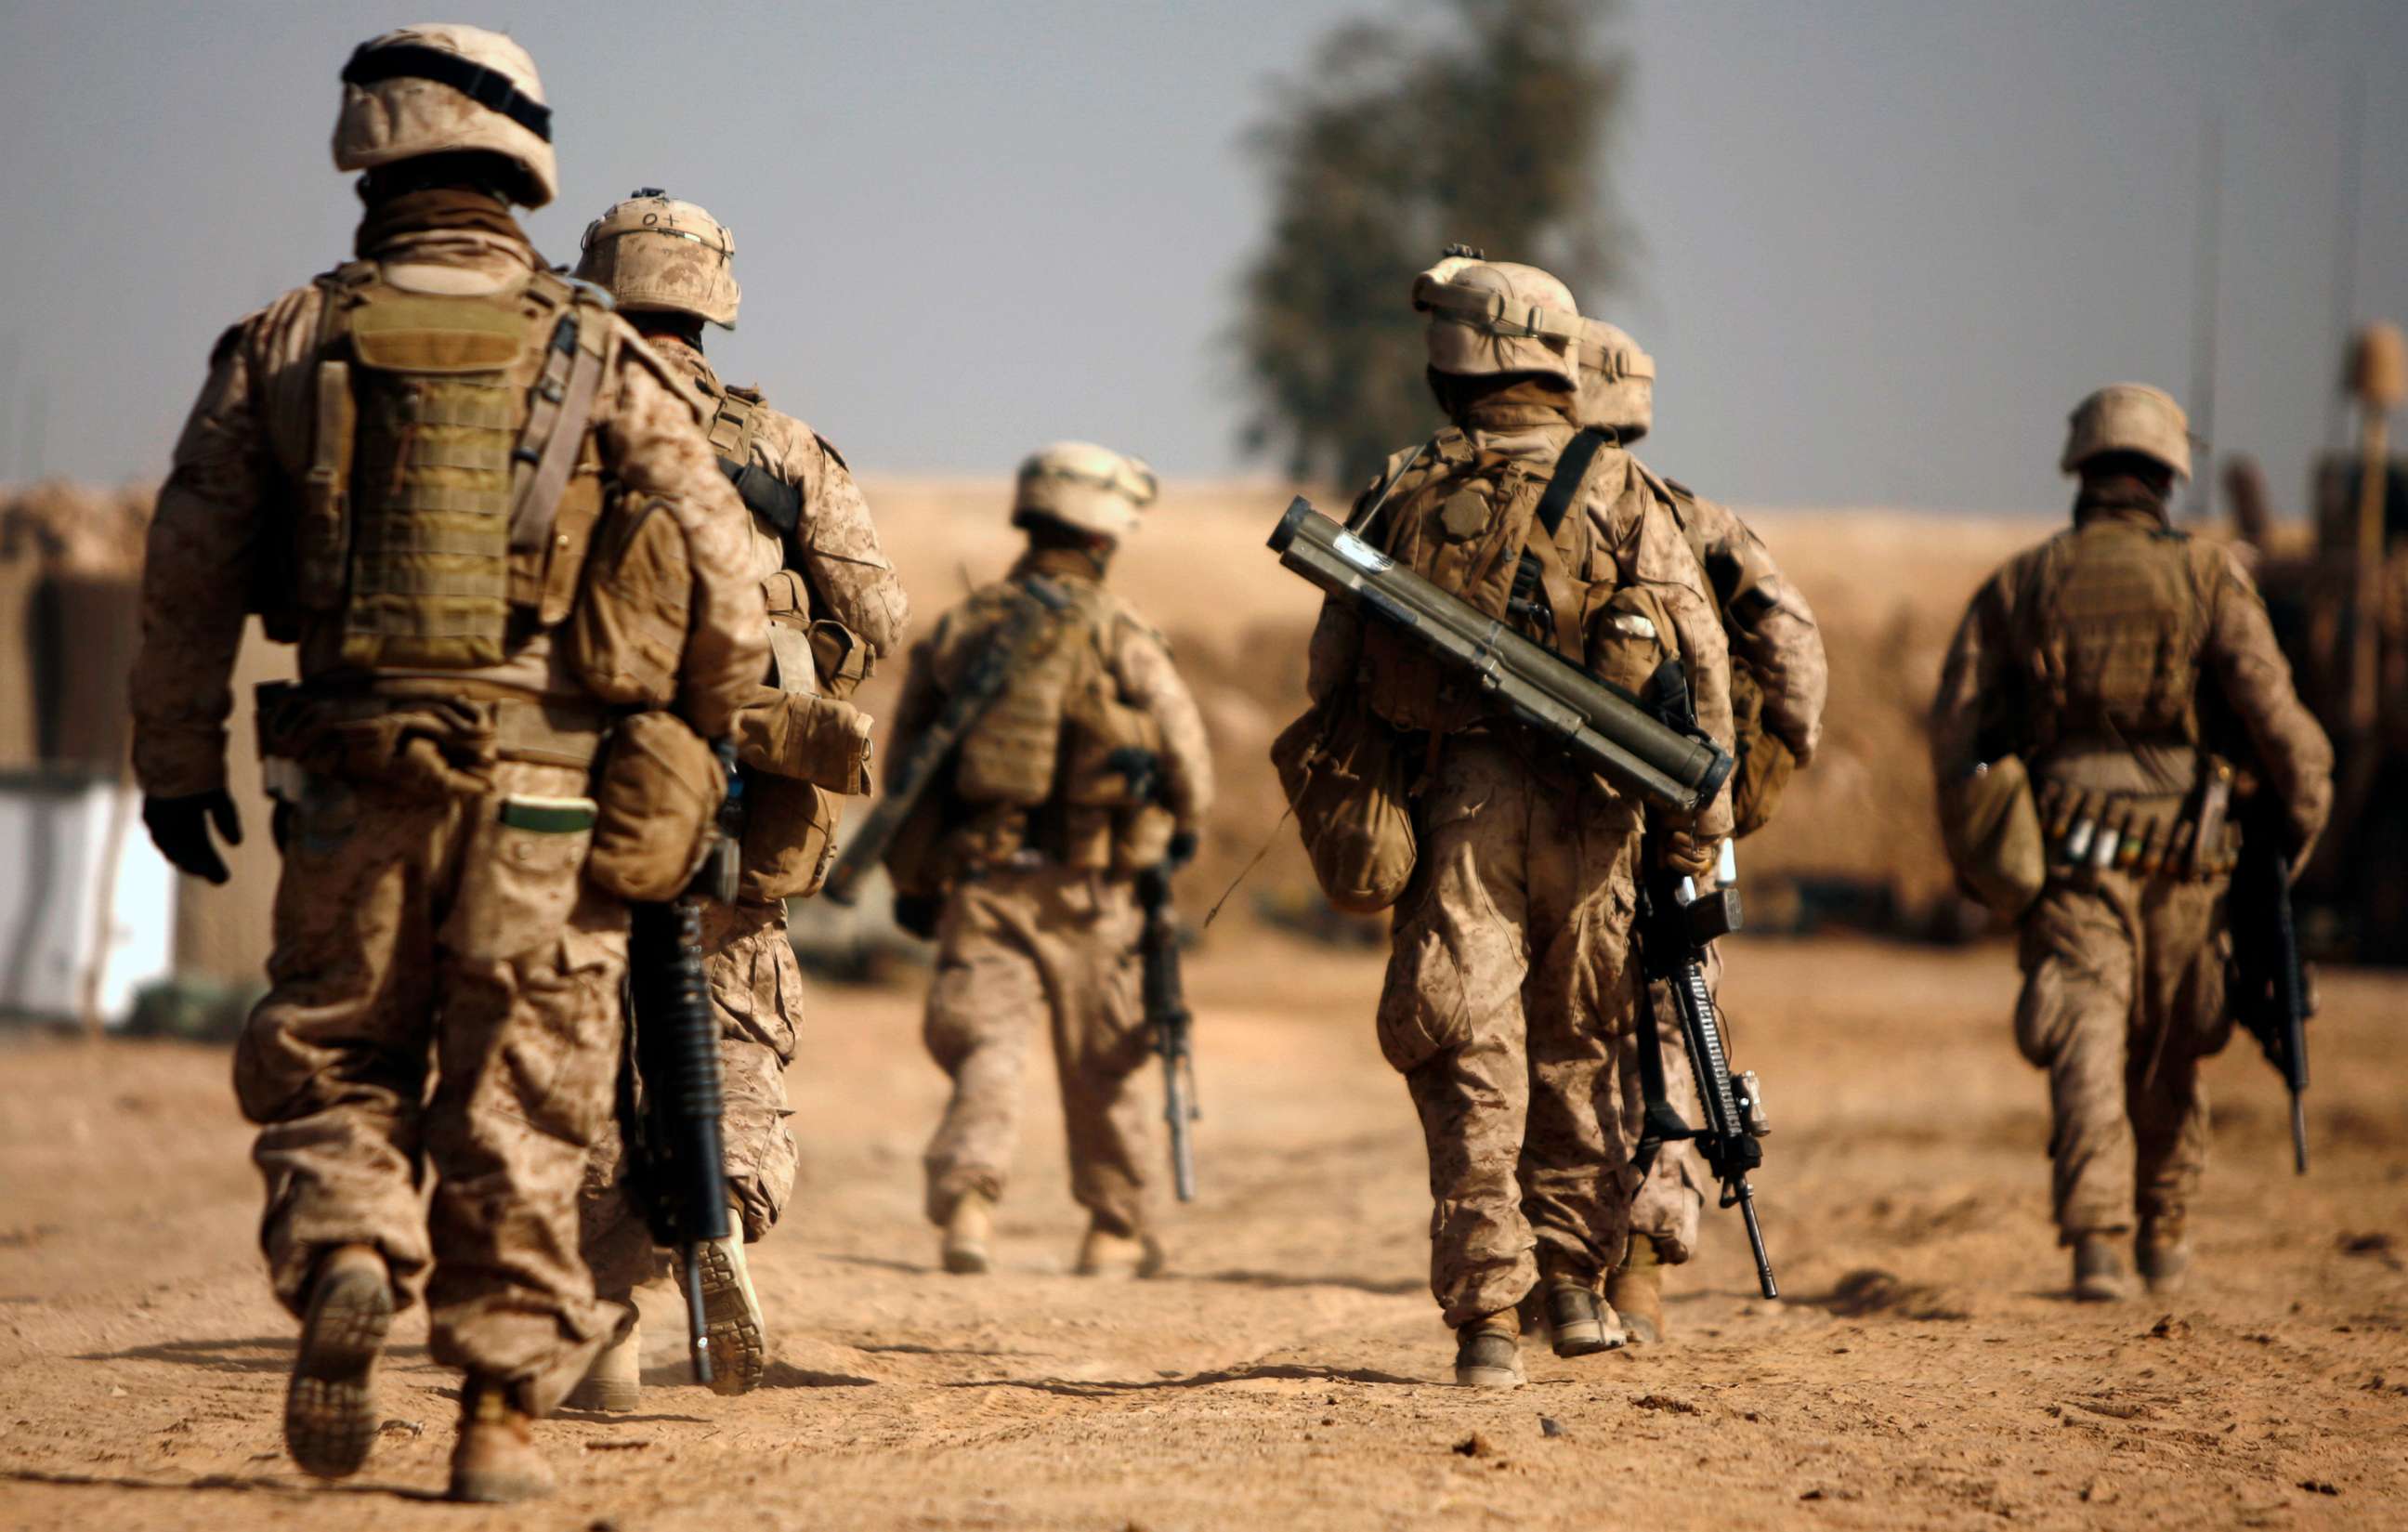 PHOTO: In this 2010 file photo, US Marines are shown in Afghanistan.